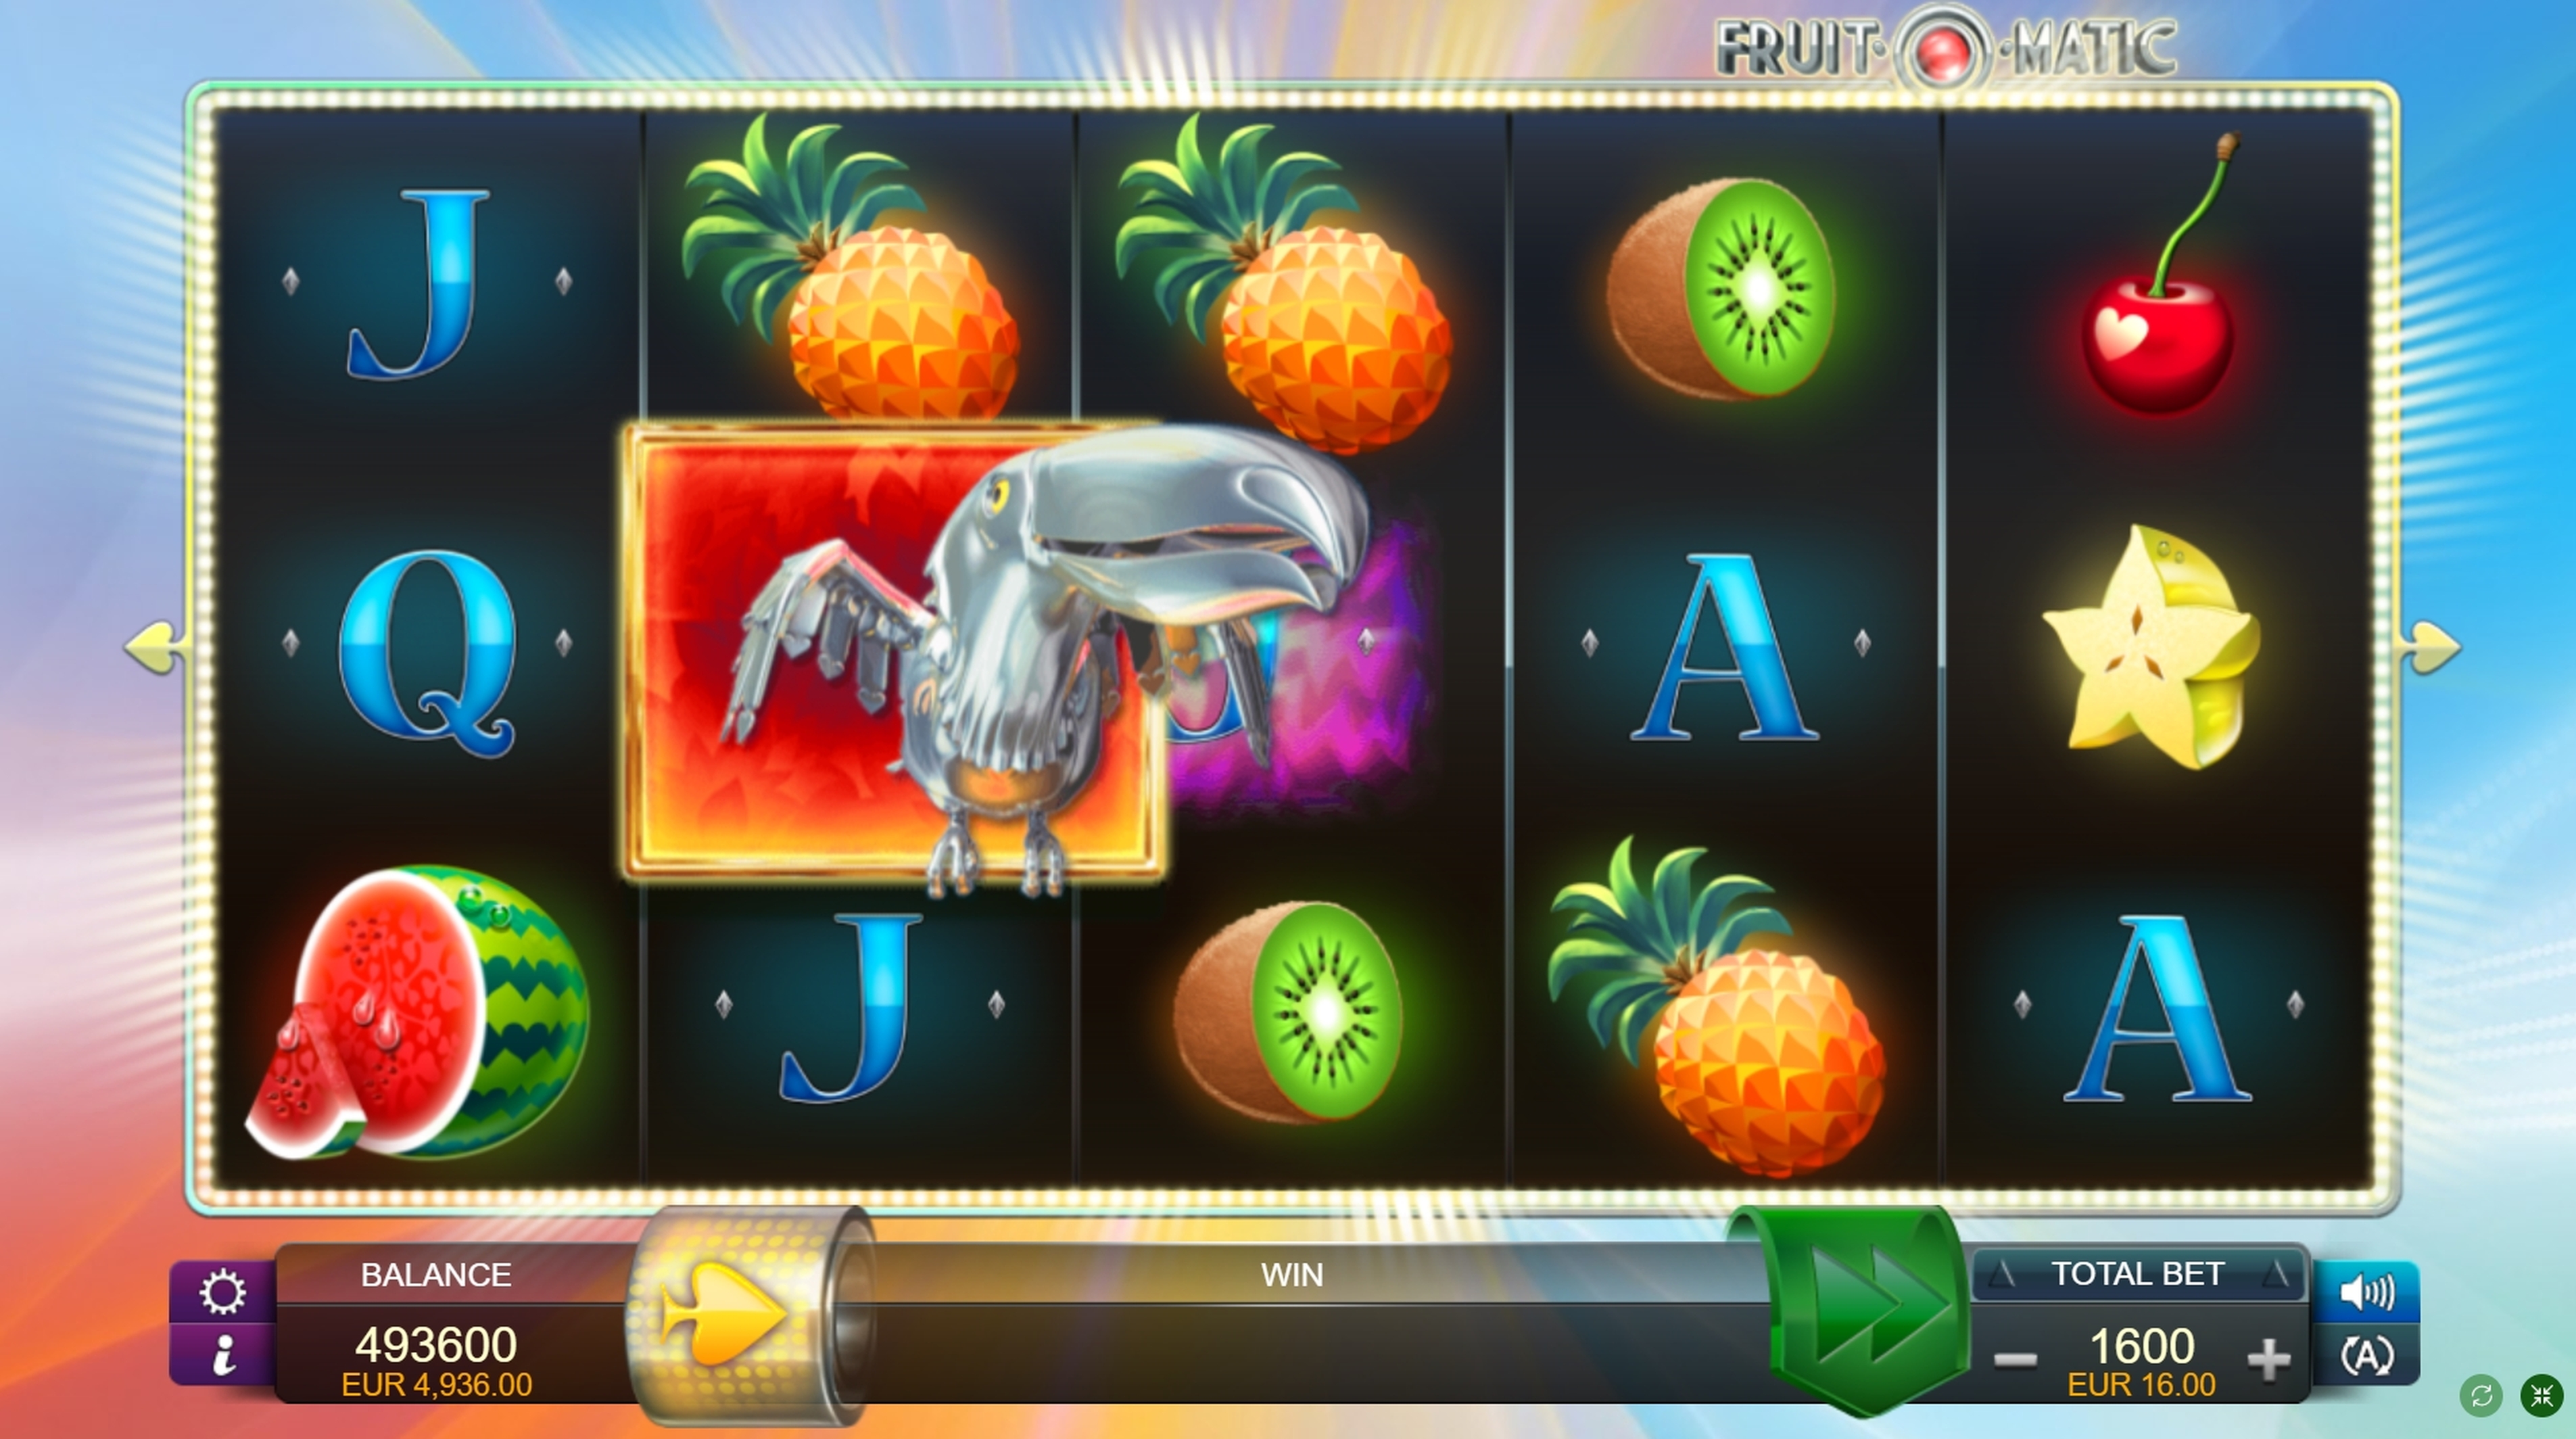 Win Money in Fruit-O-Matic Free Slot Game by FUGA Gaming